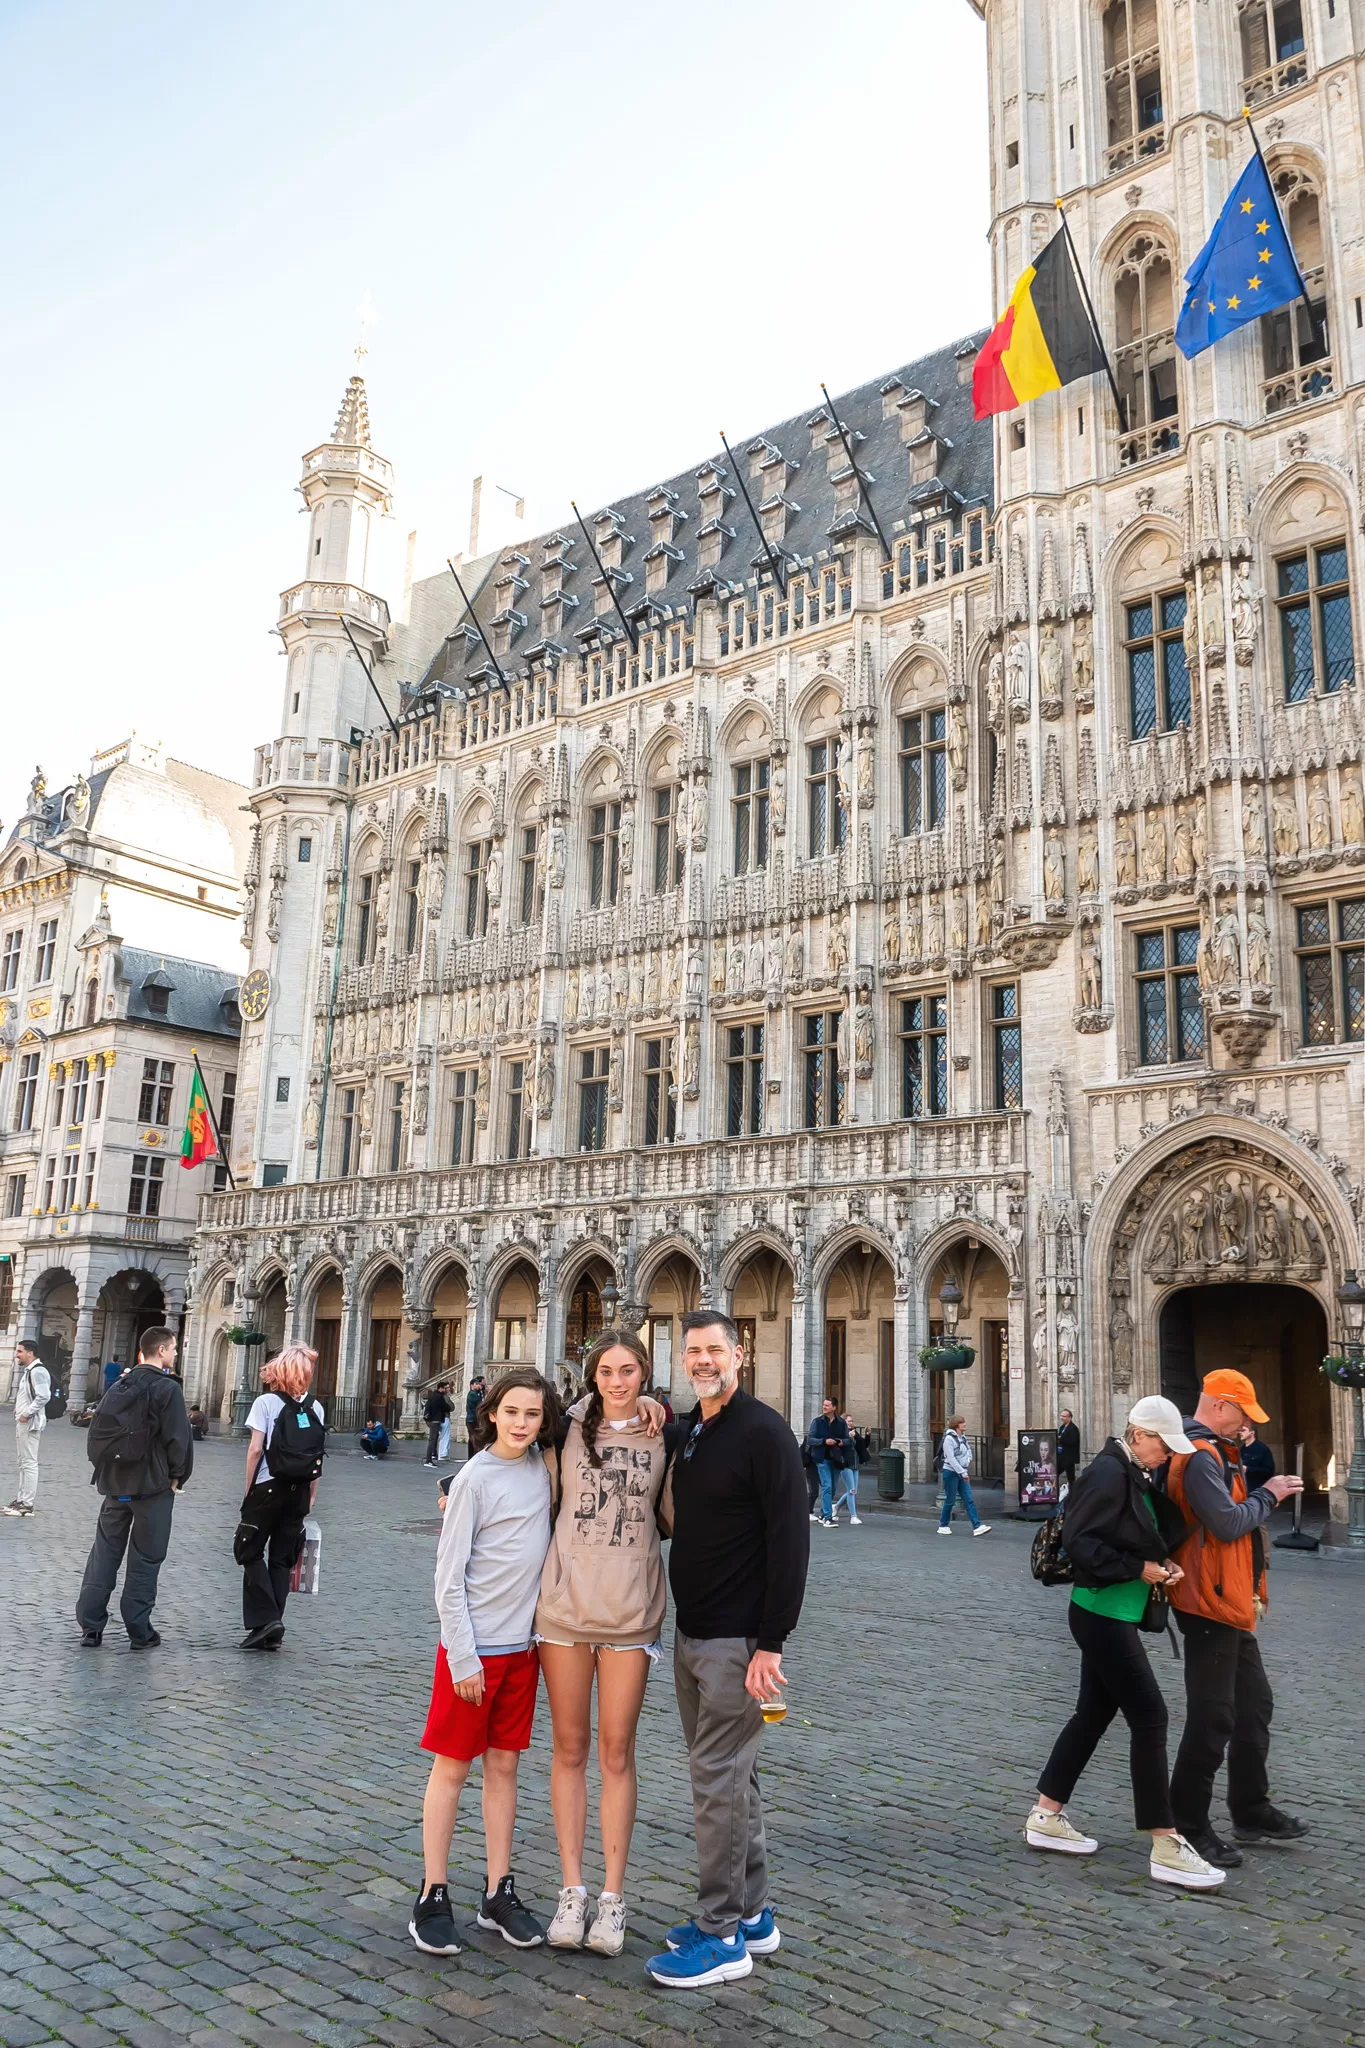 2 Days in Belgium Itinerary blog post. Image shows a day and two kids in Grand Place, Brussels.